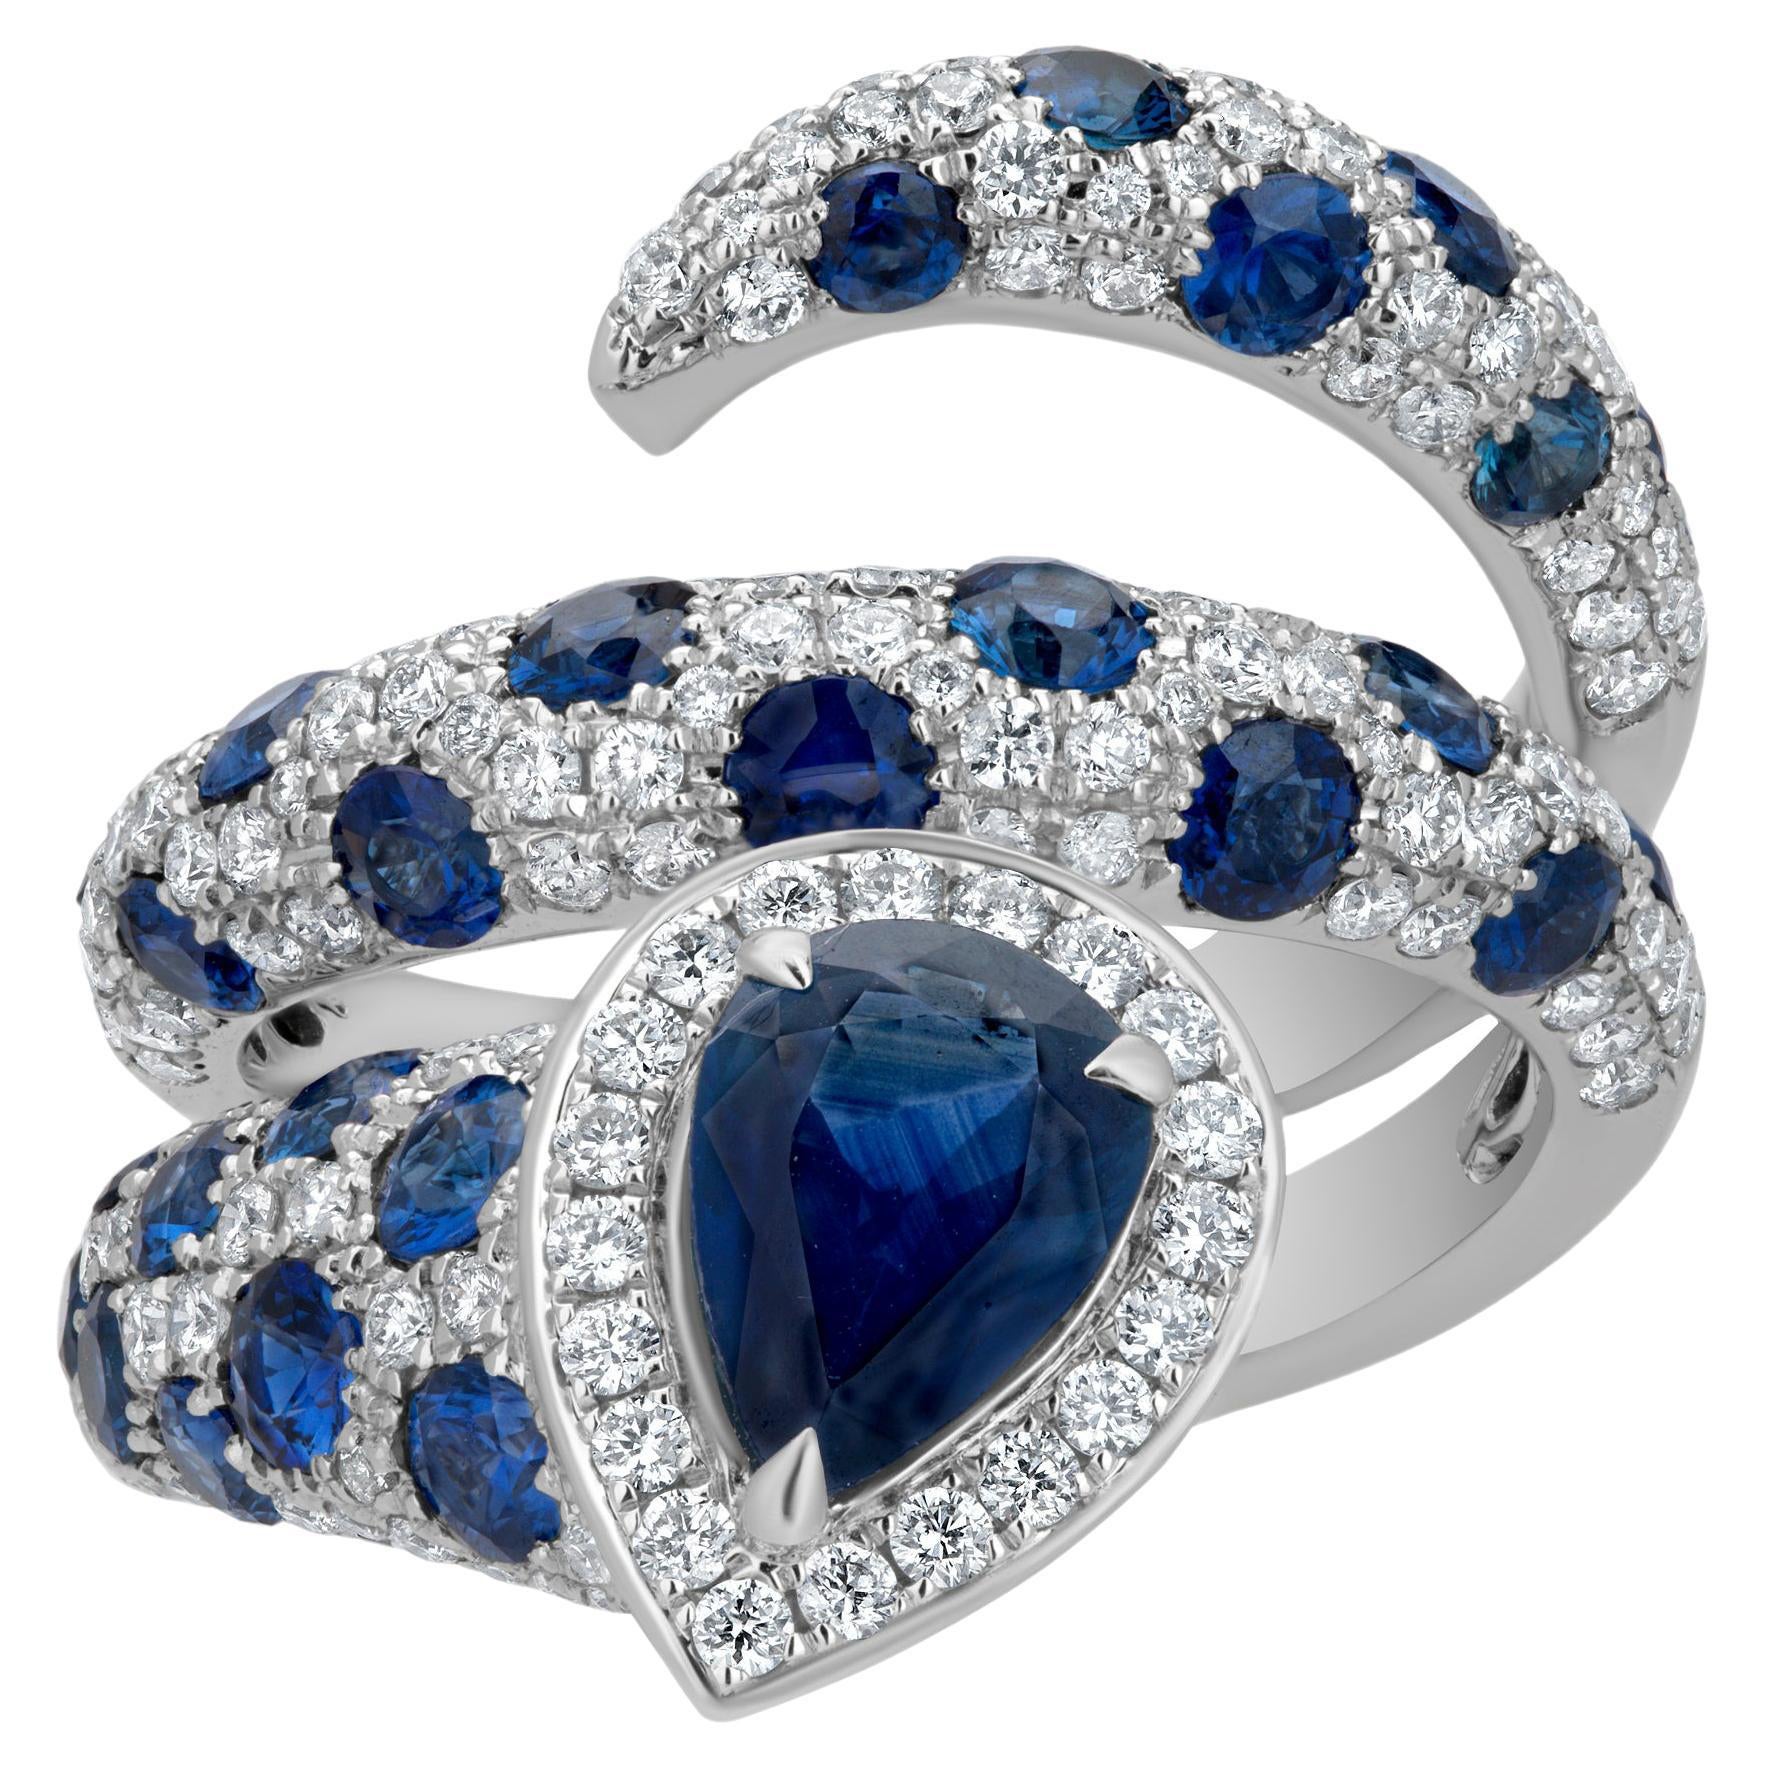 Nigaam 4.49 Cttw. Diamond and Blue Sapphire Swirl Ring in 18K White Gold For Sale